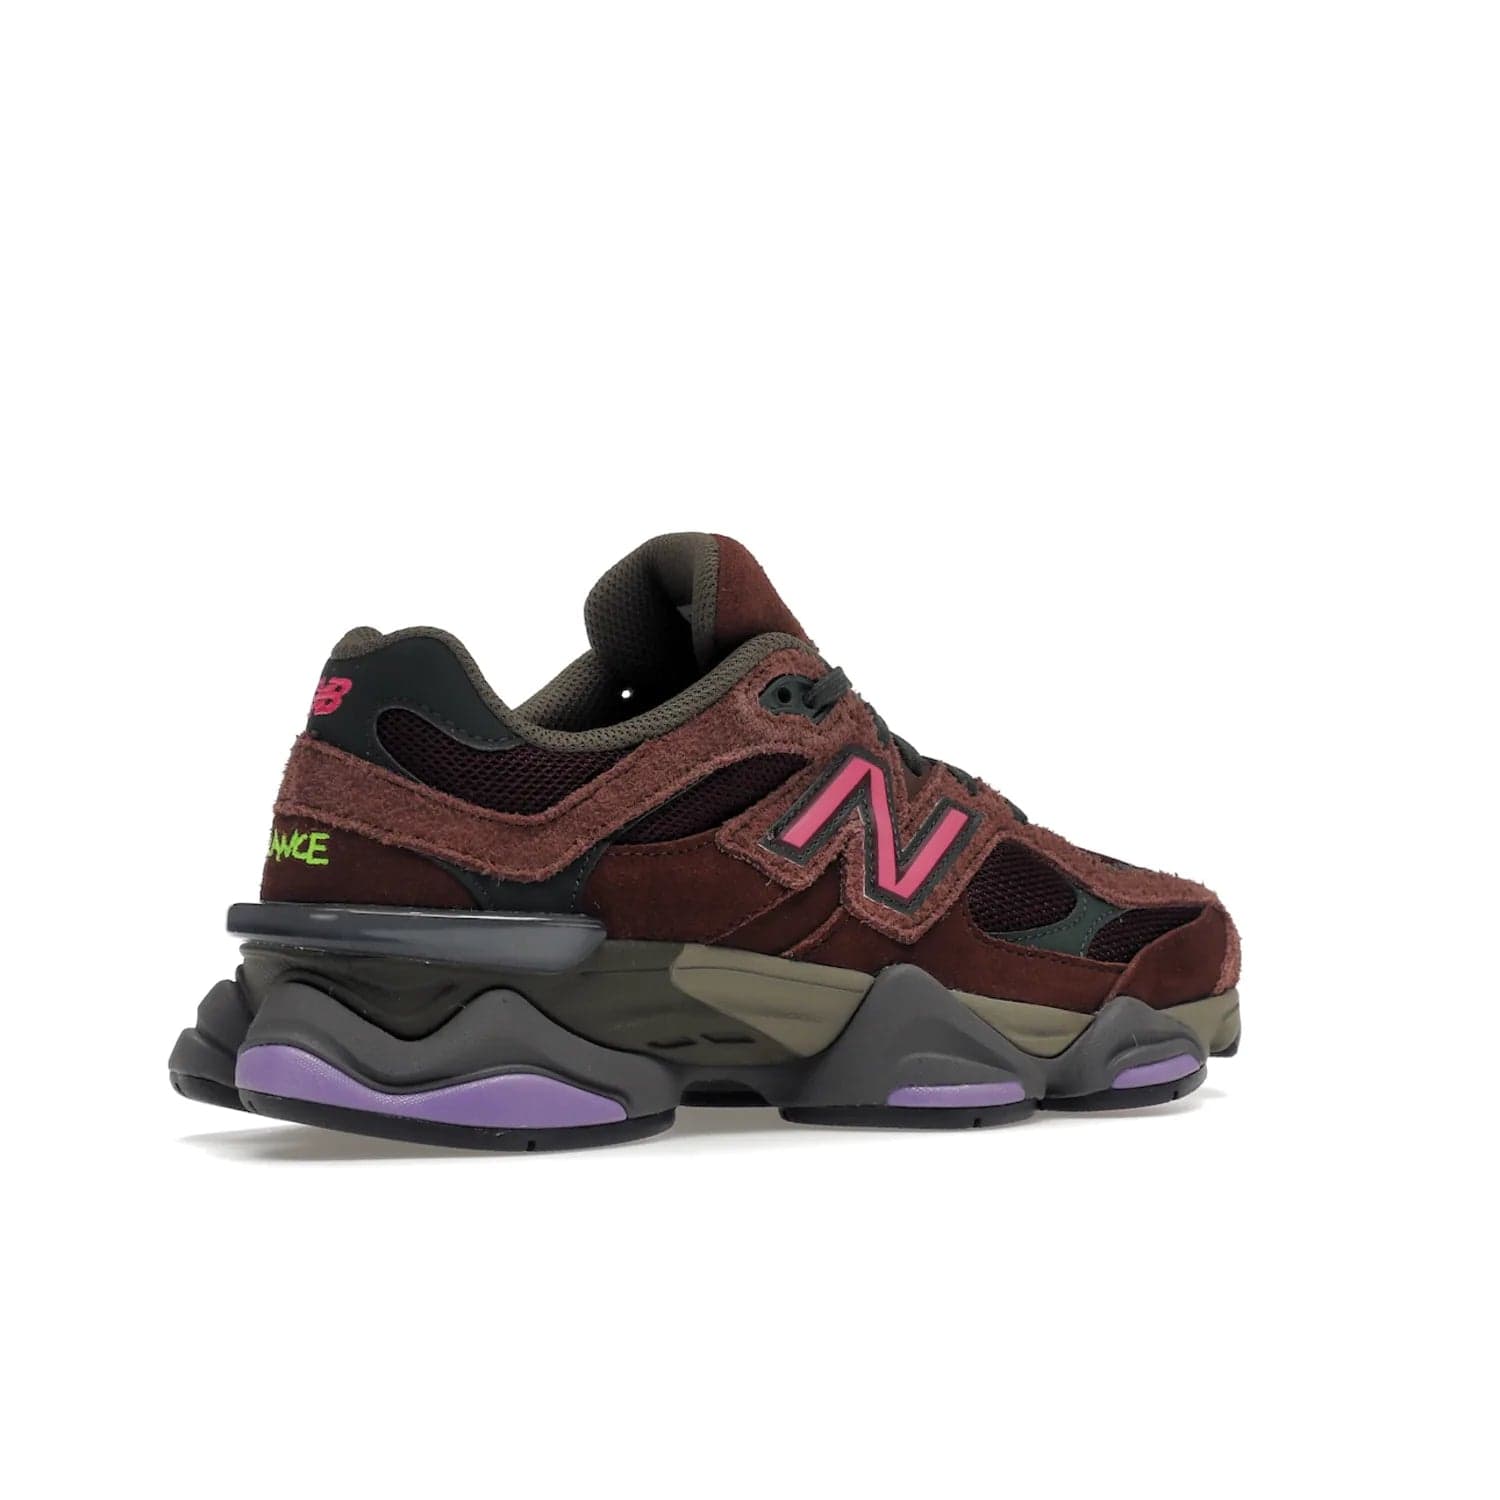 New Balance 9060 Rich Oak Burgundy - Image 34 - Only at www.BallersClubKickz.com - The New Balance 9060 is a stylish blend of performance and fashion. Featuring oak and burgundy hues, a durable upper, Fresh Foam cushioning and expanded rubber outsole, you’ll be looking and feeling great with every step. Available November 5th.